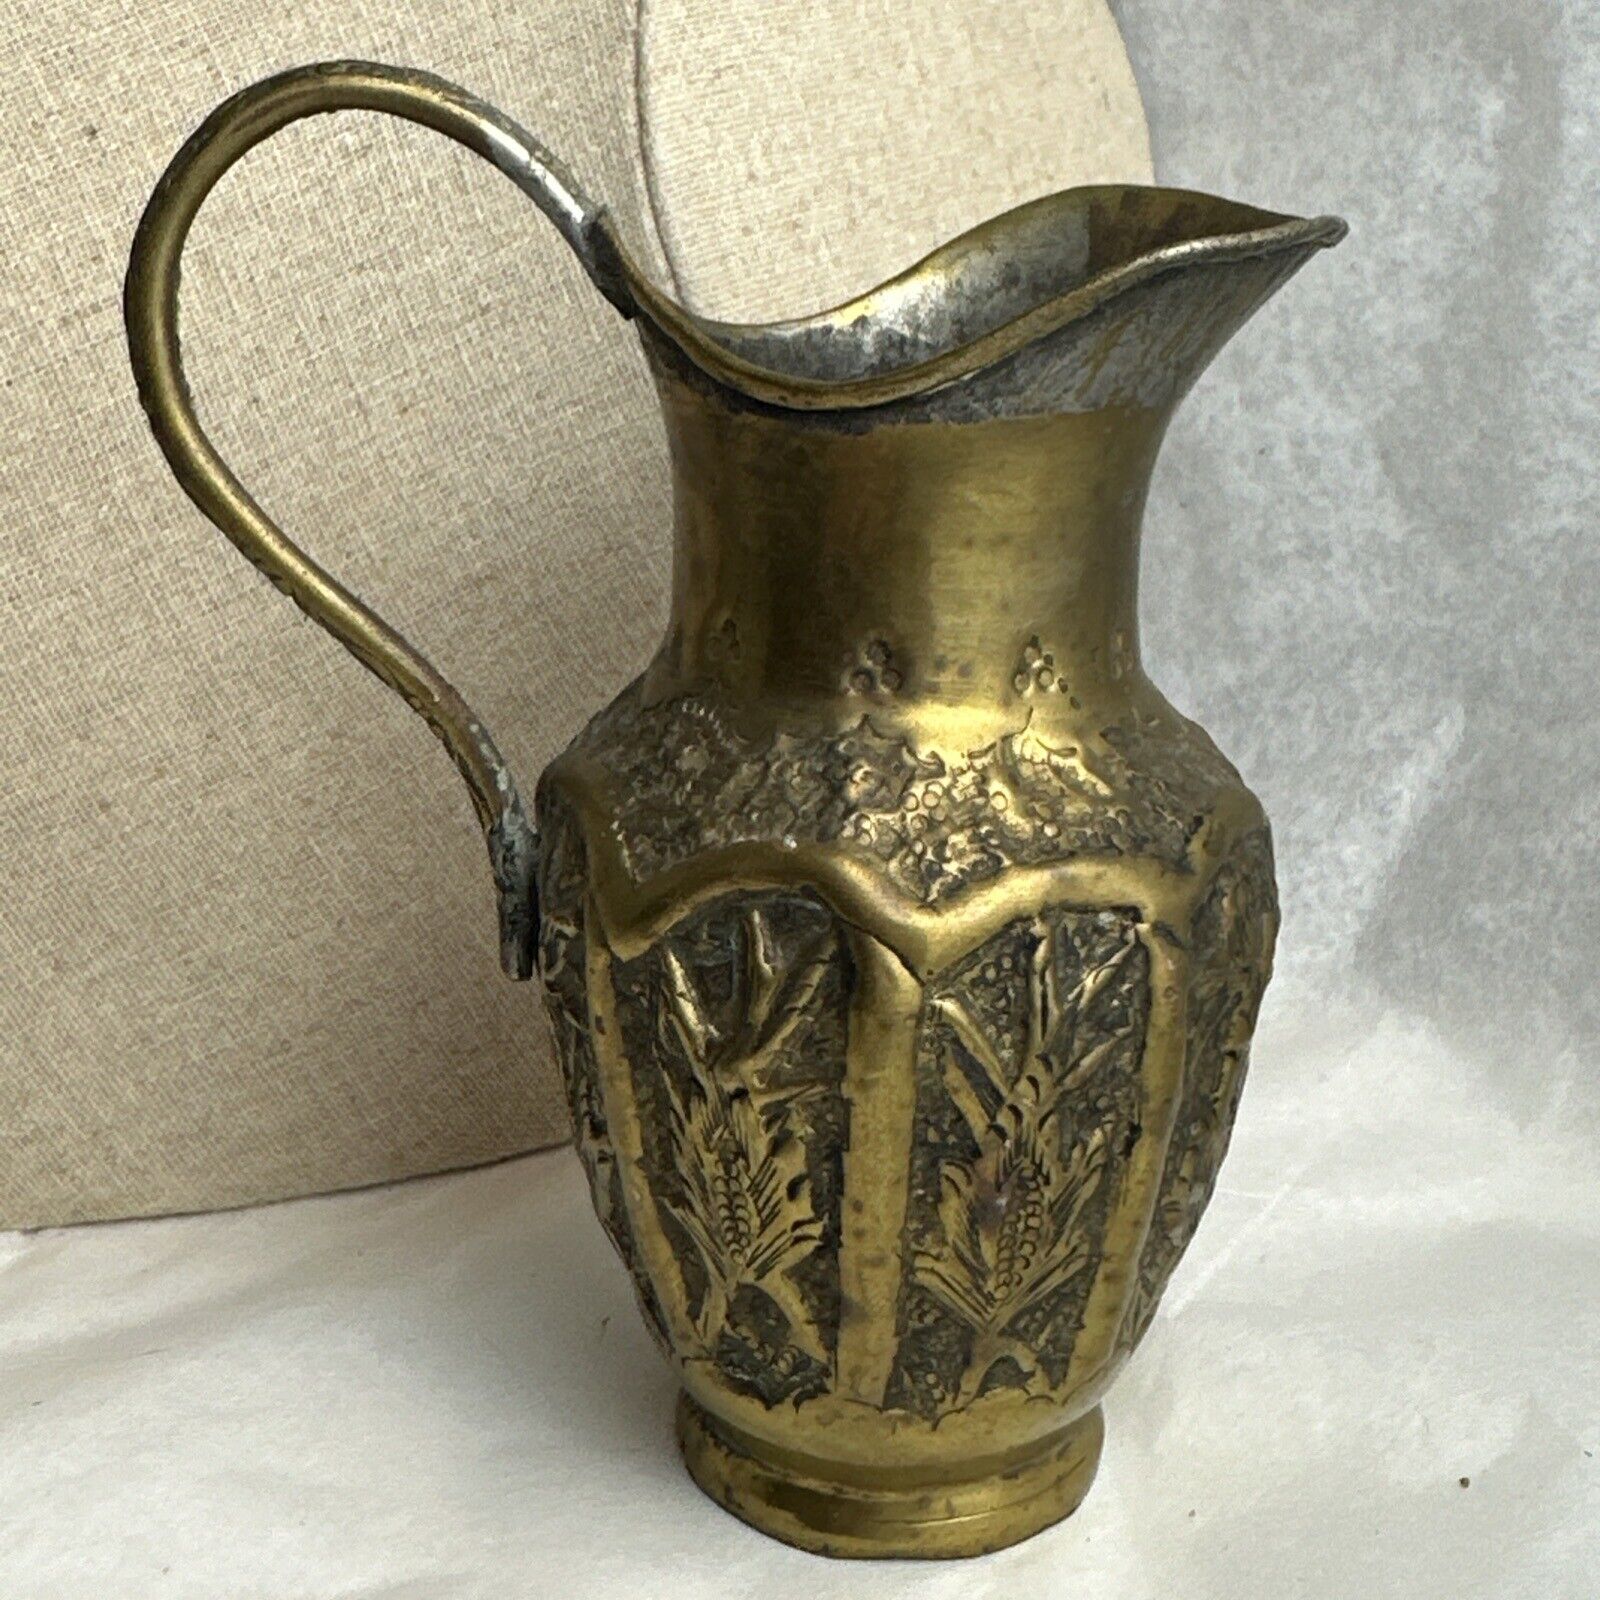 Antique handcrafted gold toned brass pitcher